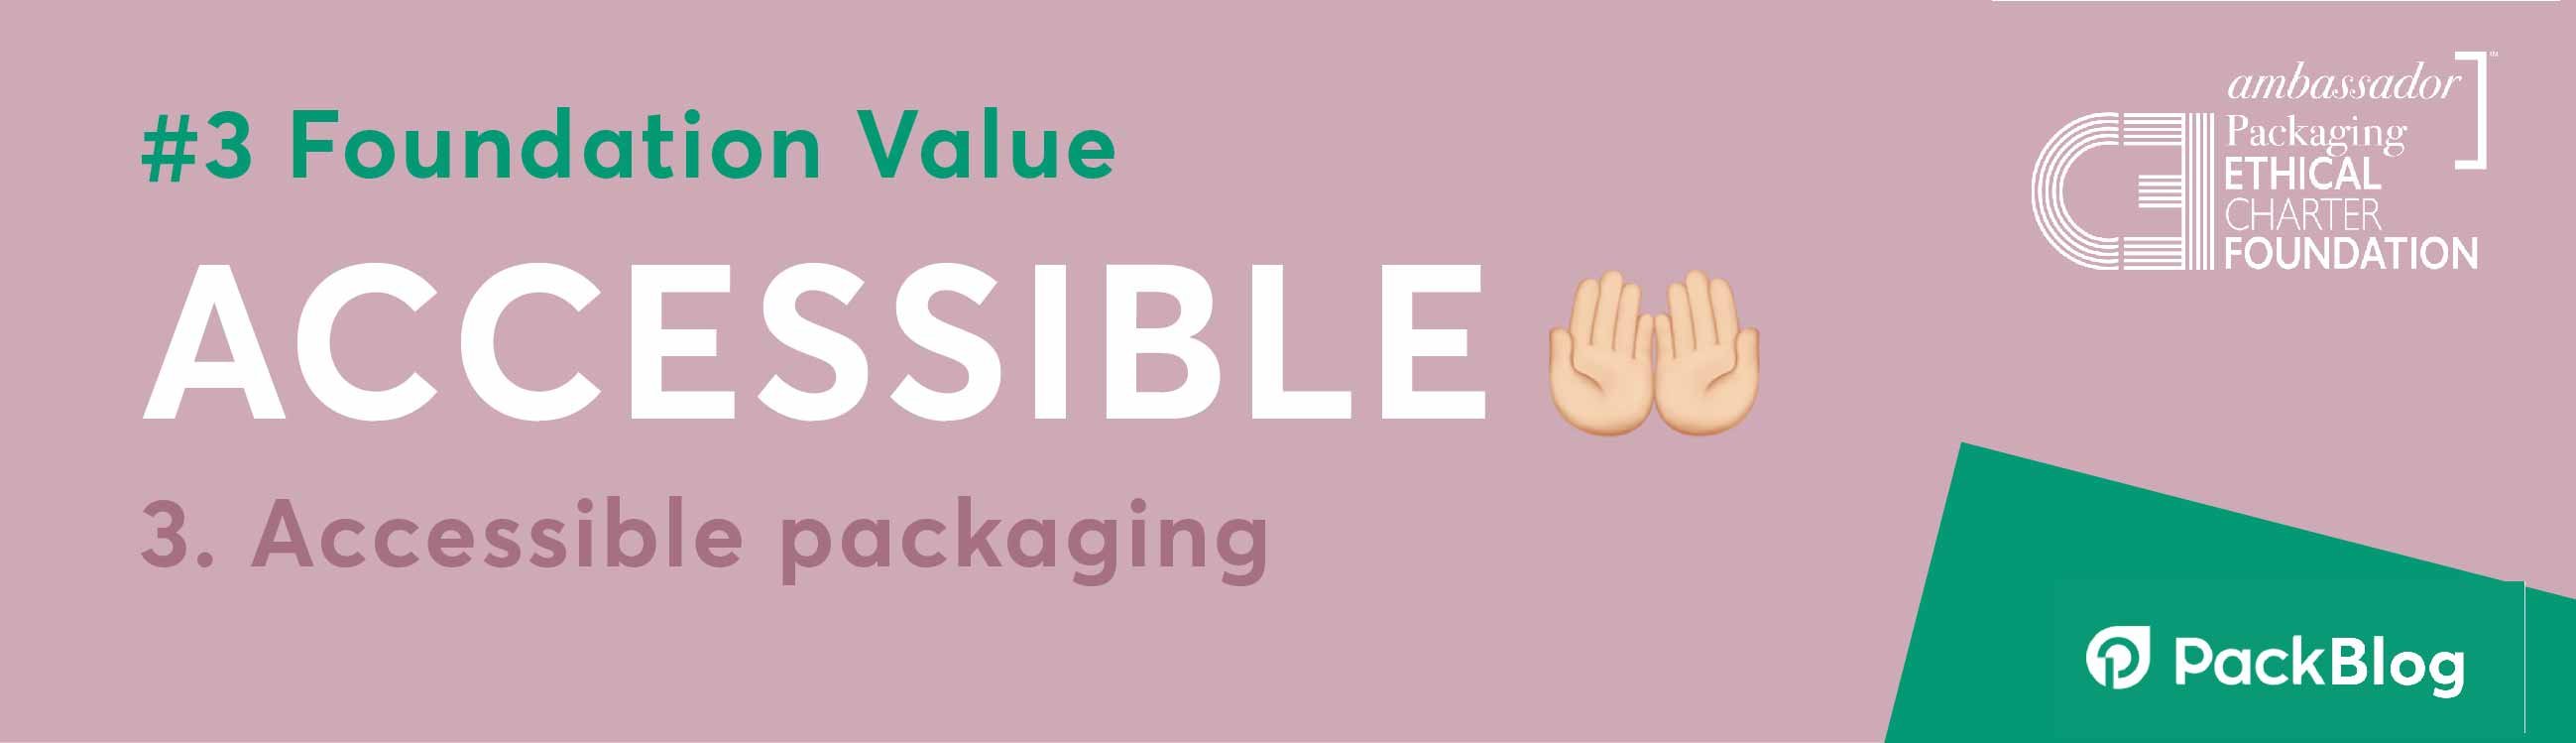 Packaging accessibile 